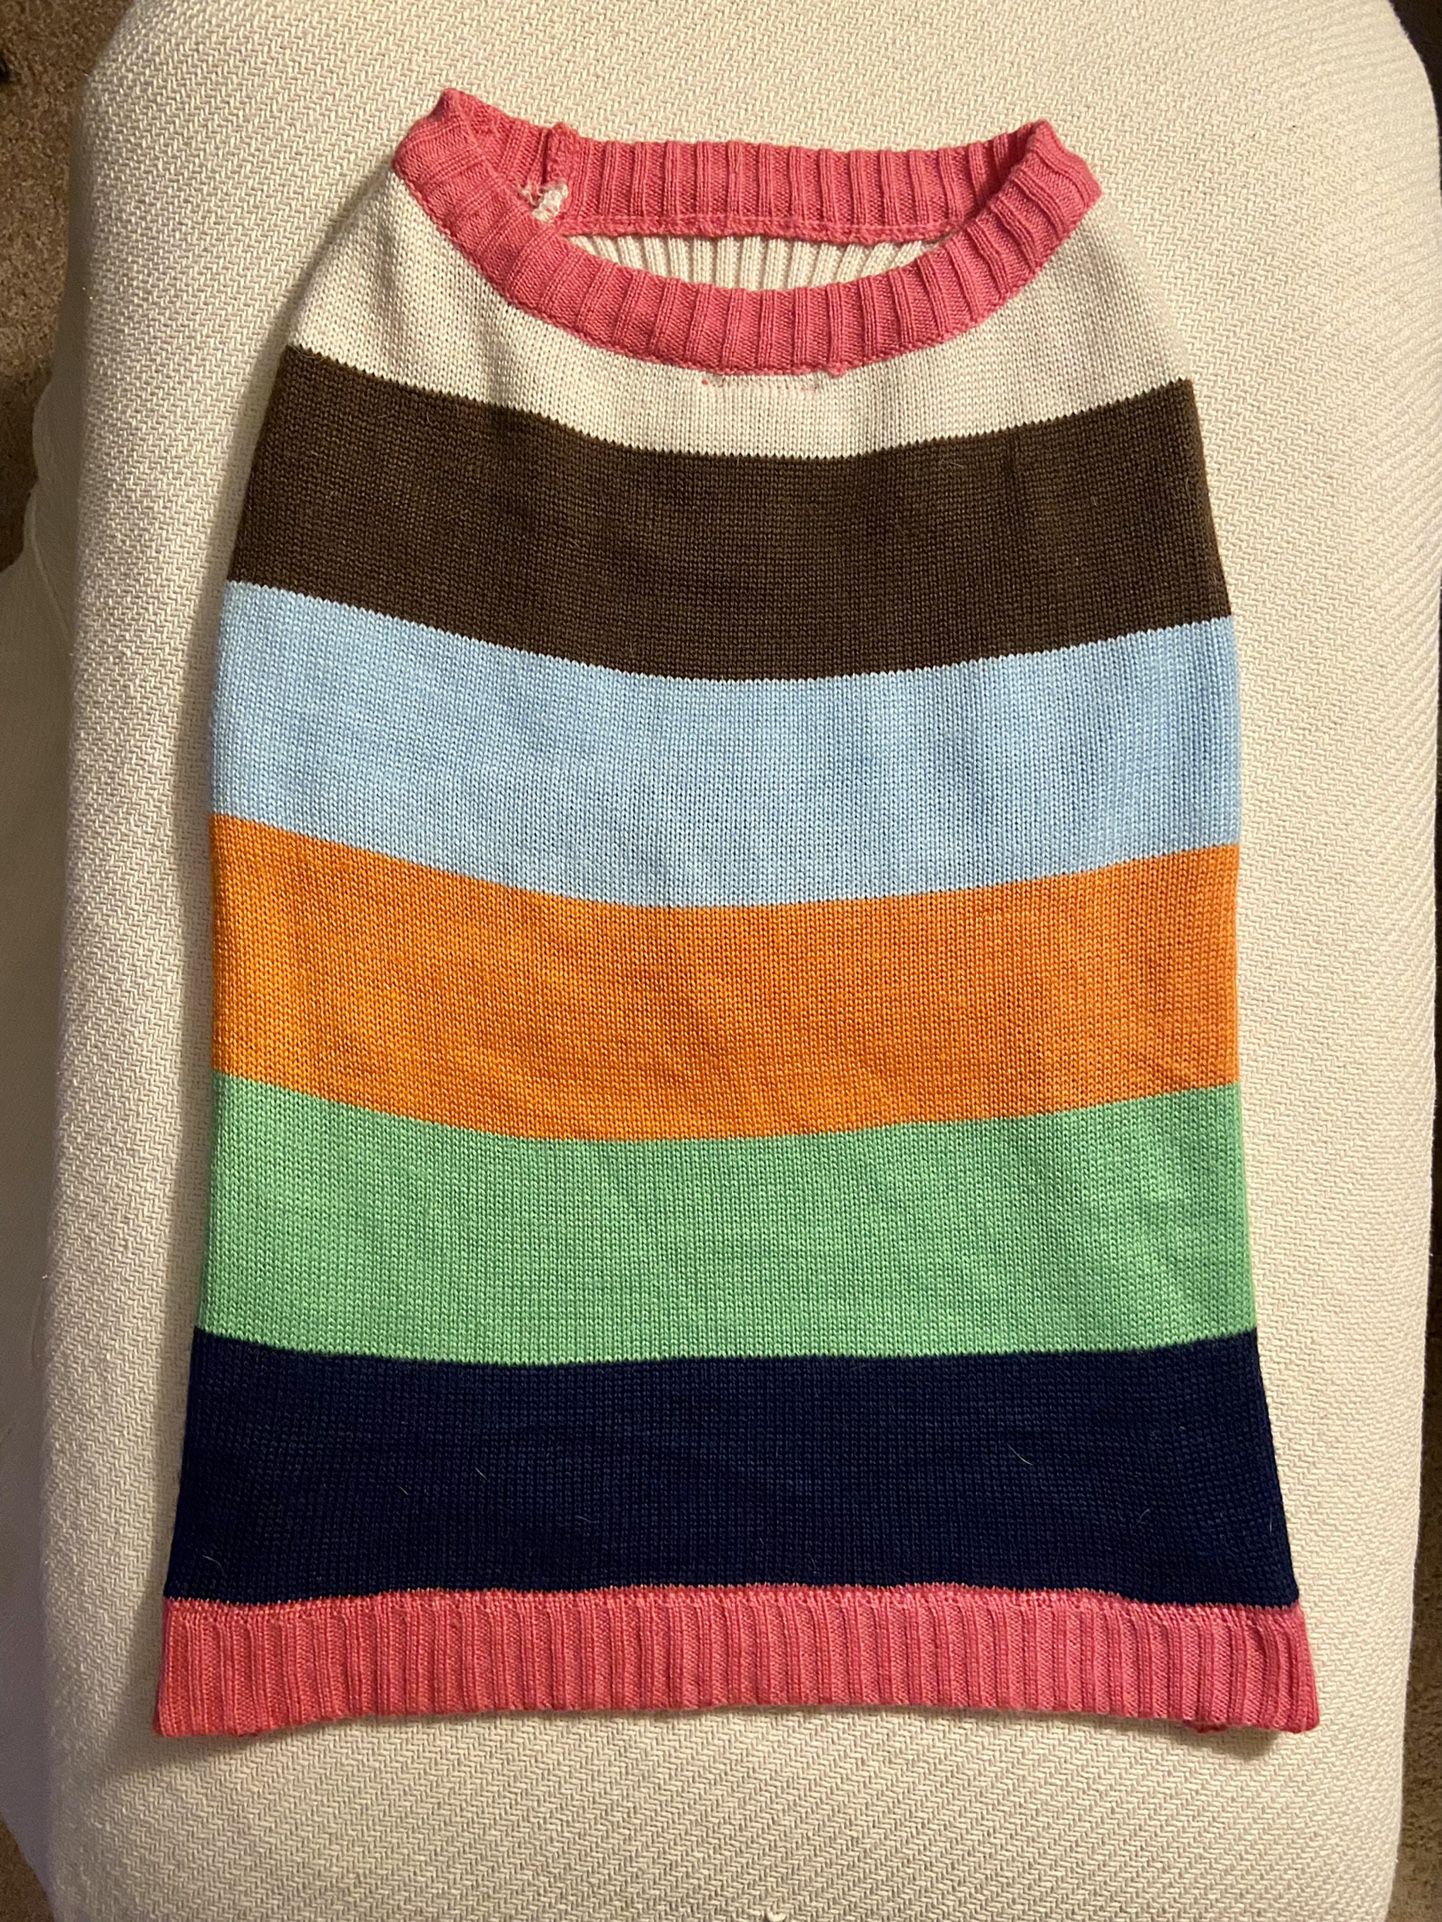 Colorful and Soft Dog Sweater